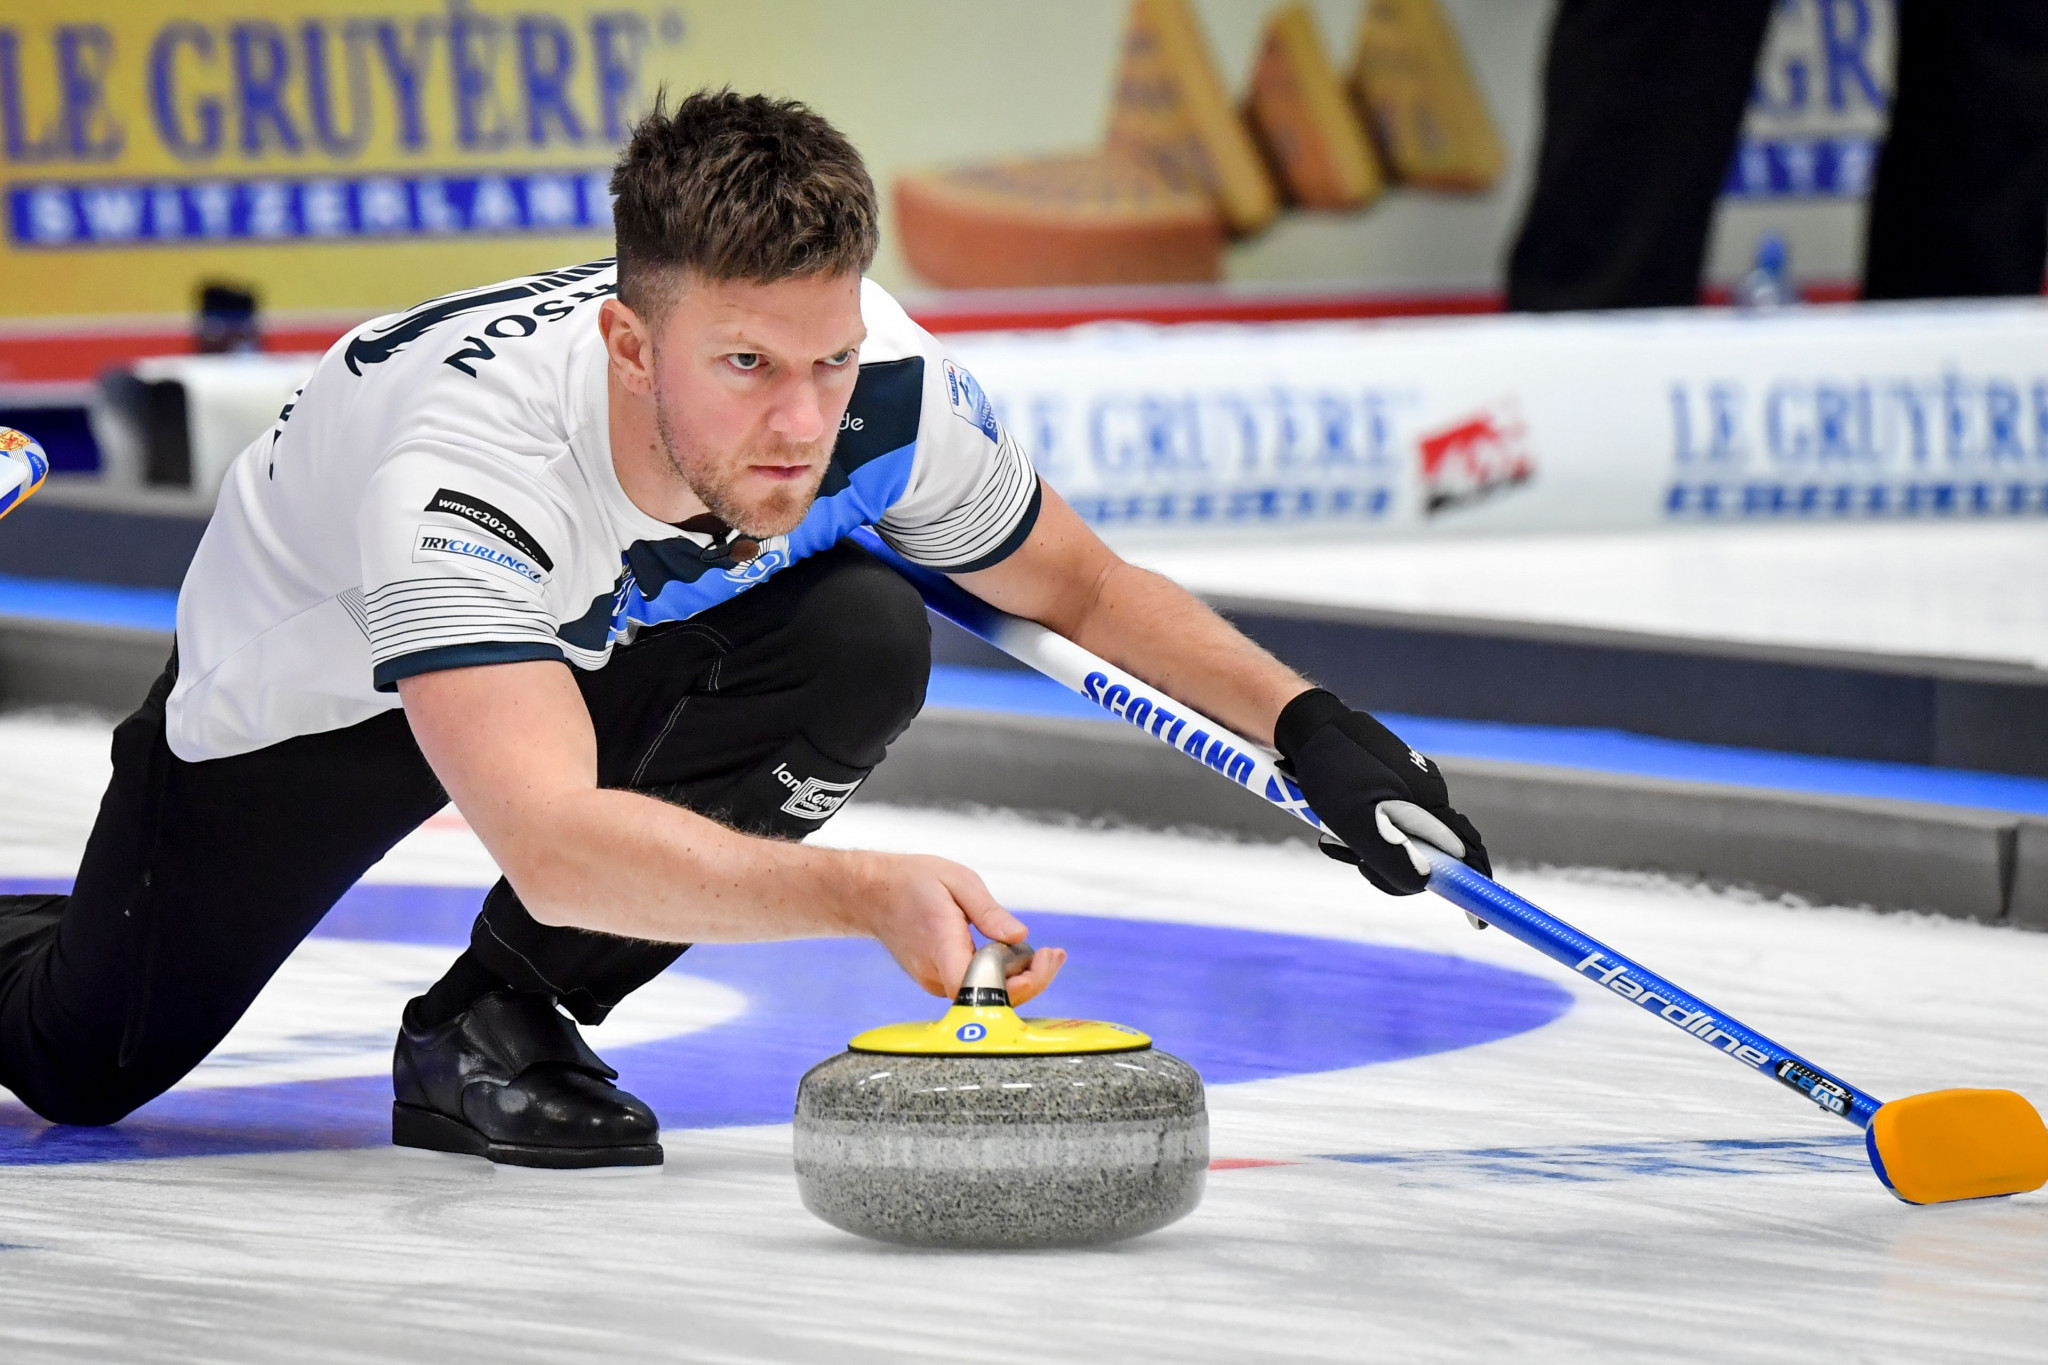 Defending men's champion loses first match at curling's Canadian Open